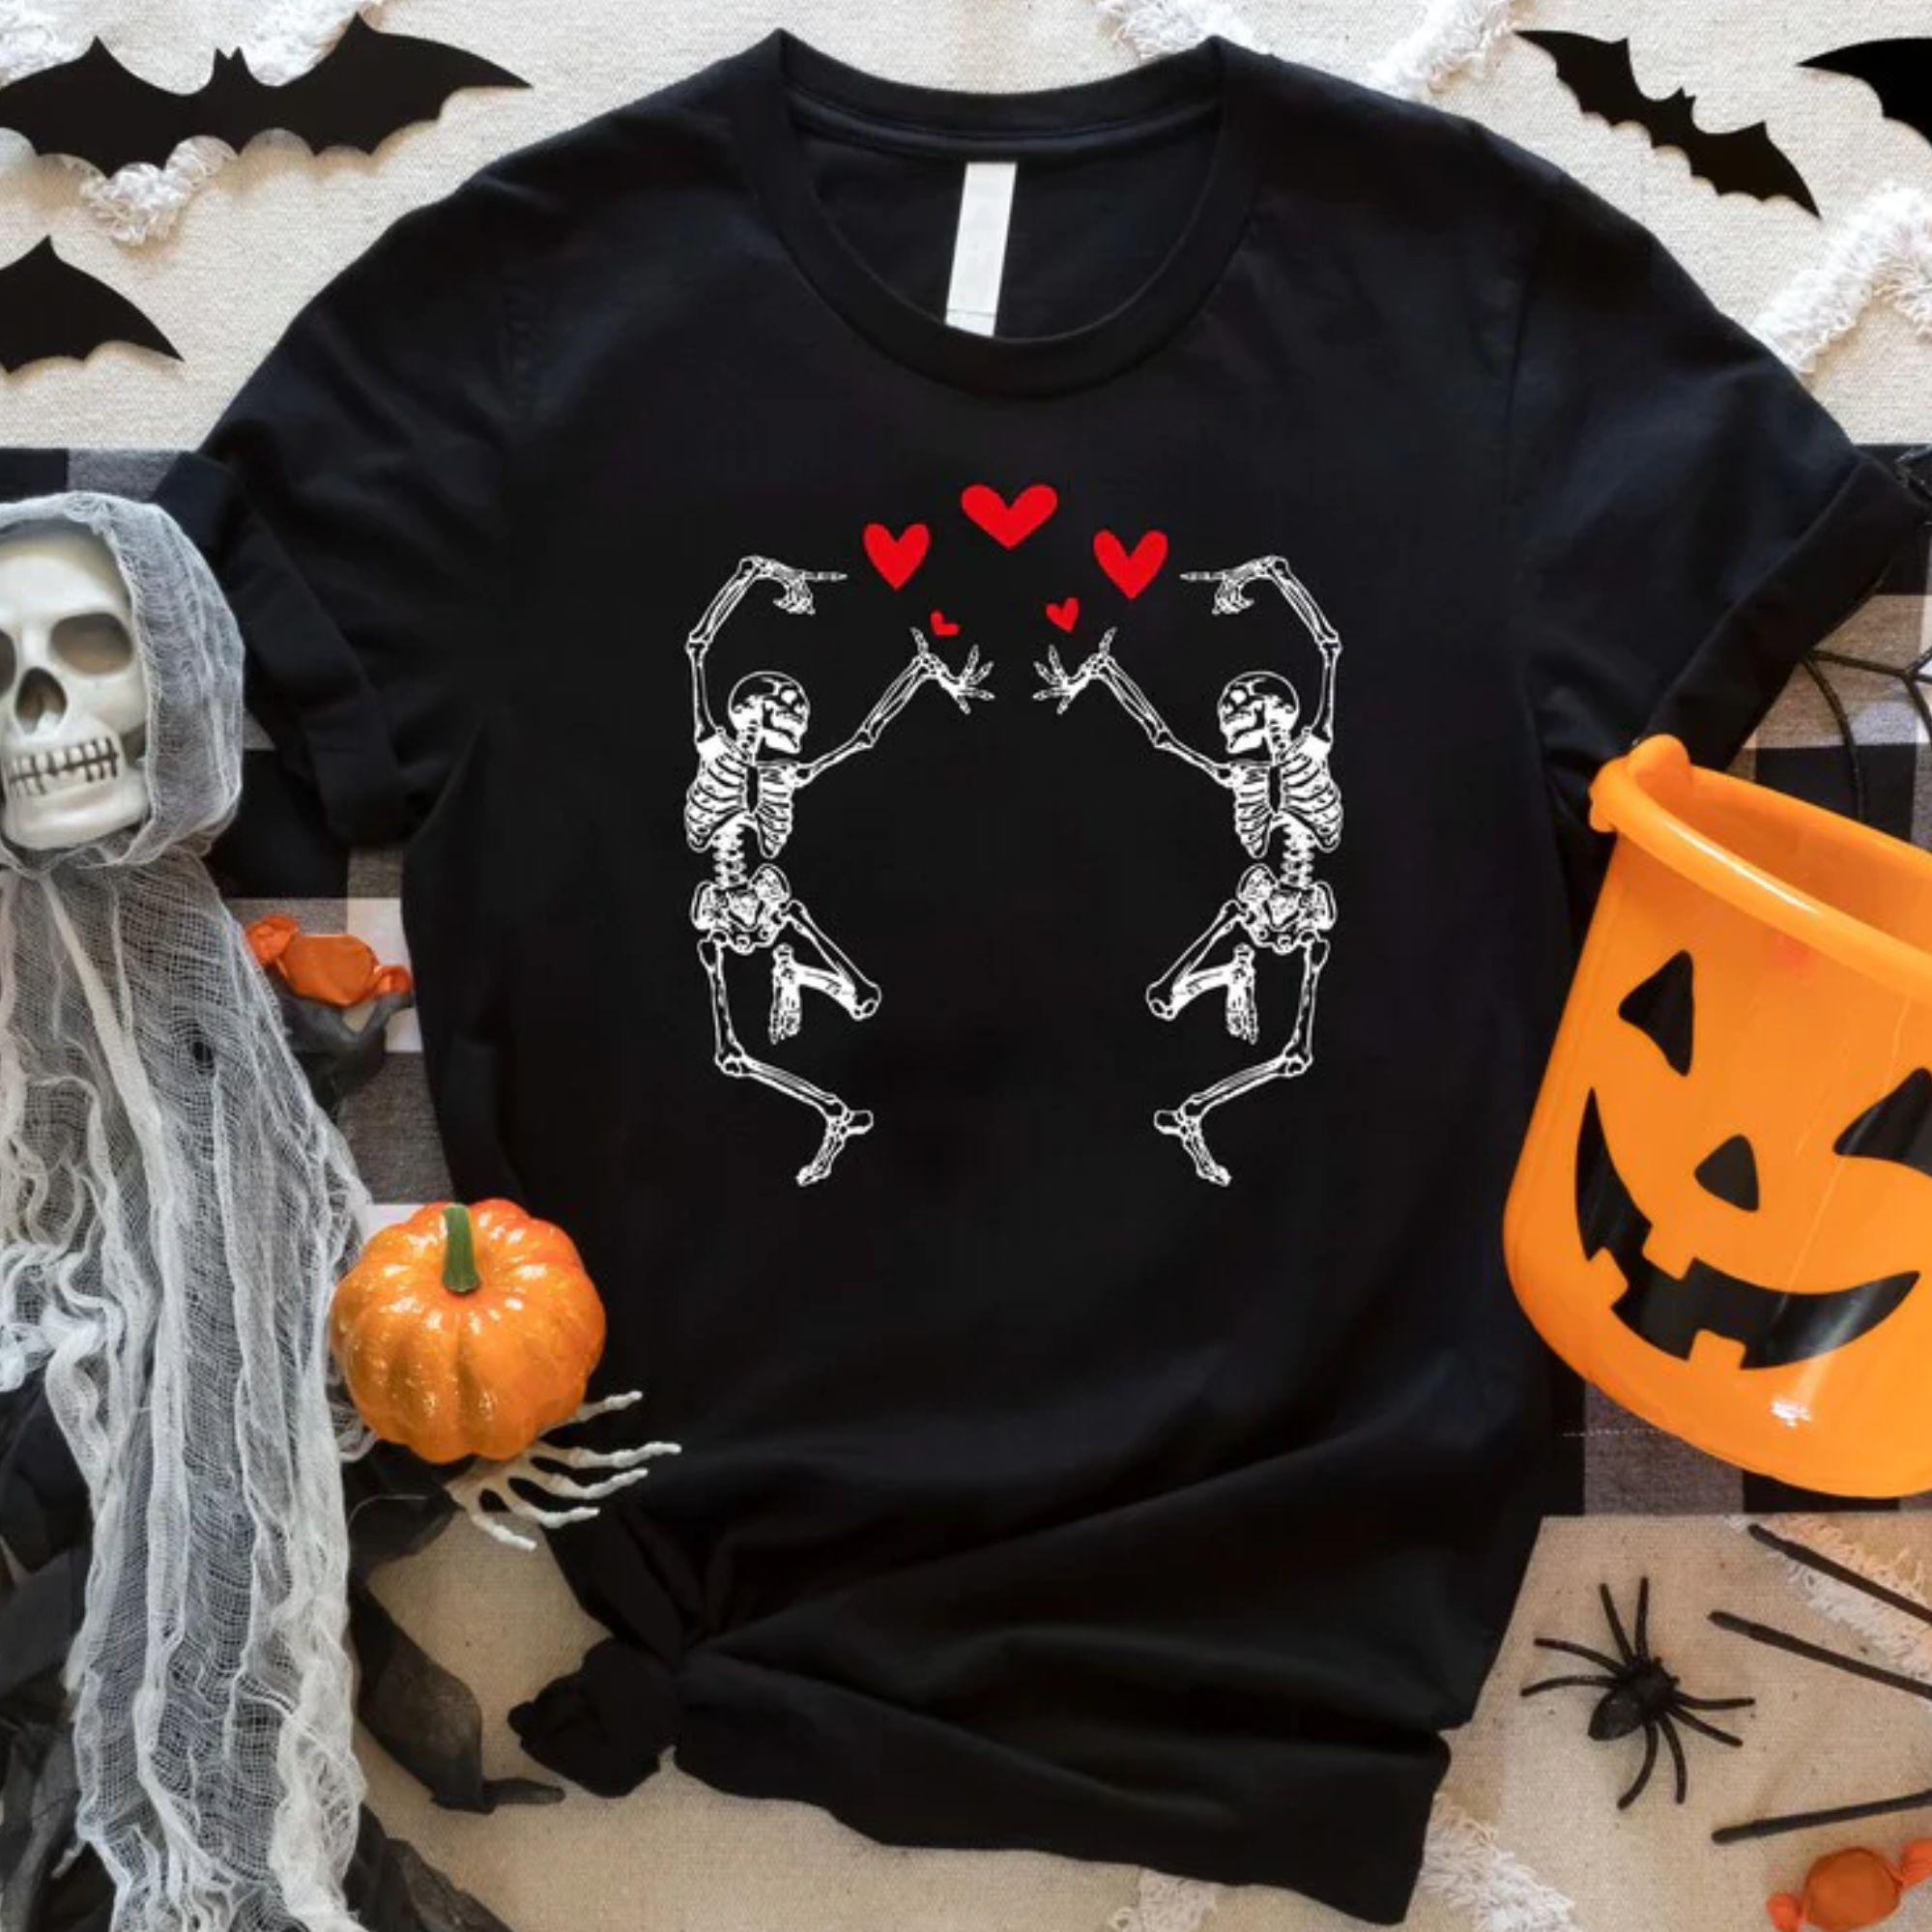 Valentine Funny Dancing Skeleton - Gift For Couple, Wife, Girlfriend - Unisex Shirt